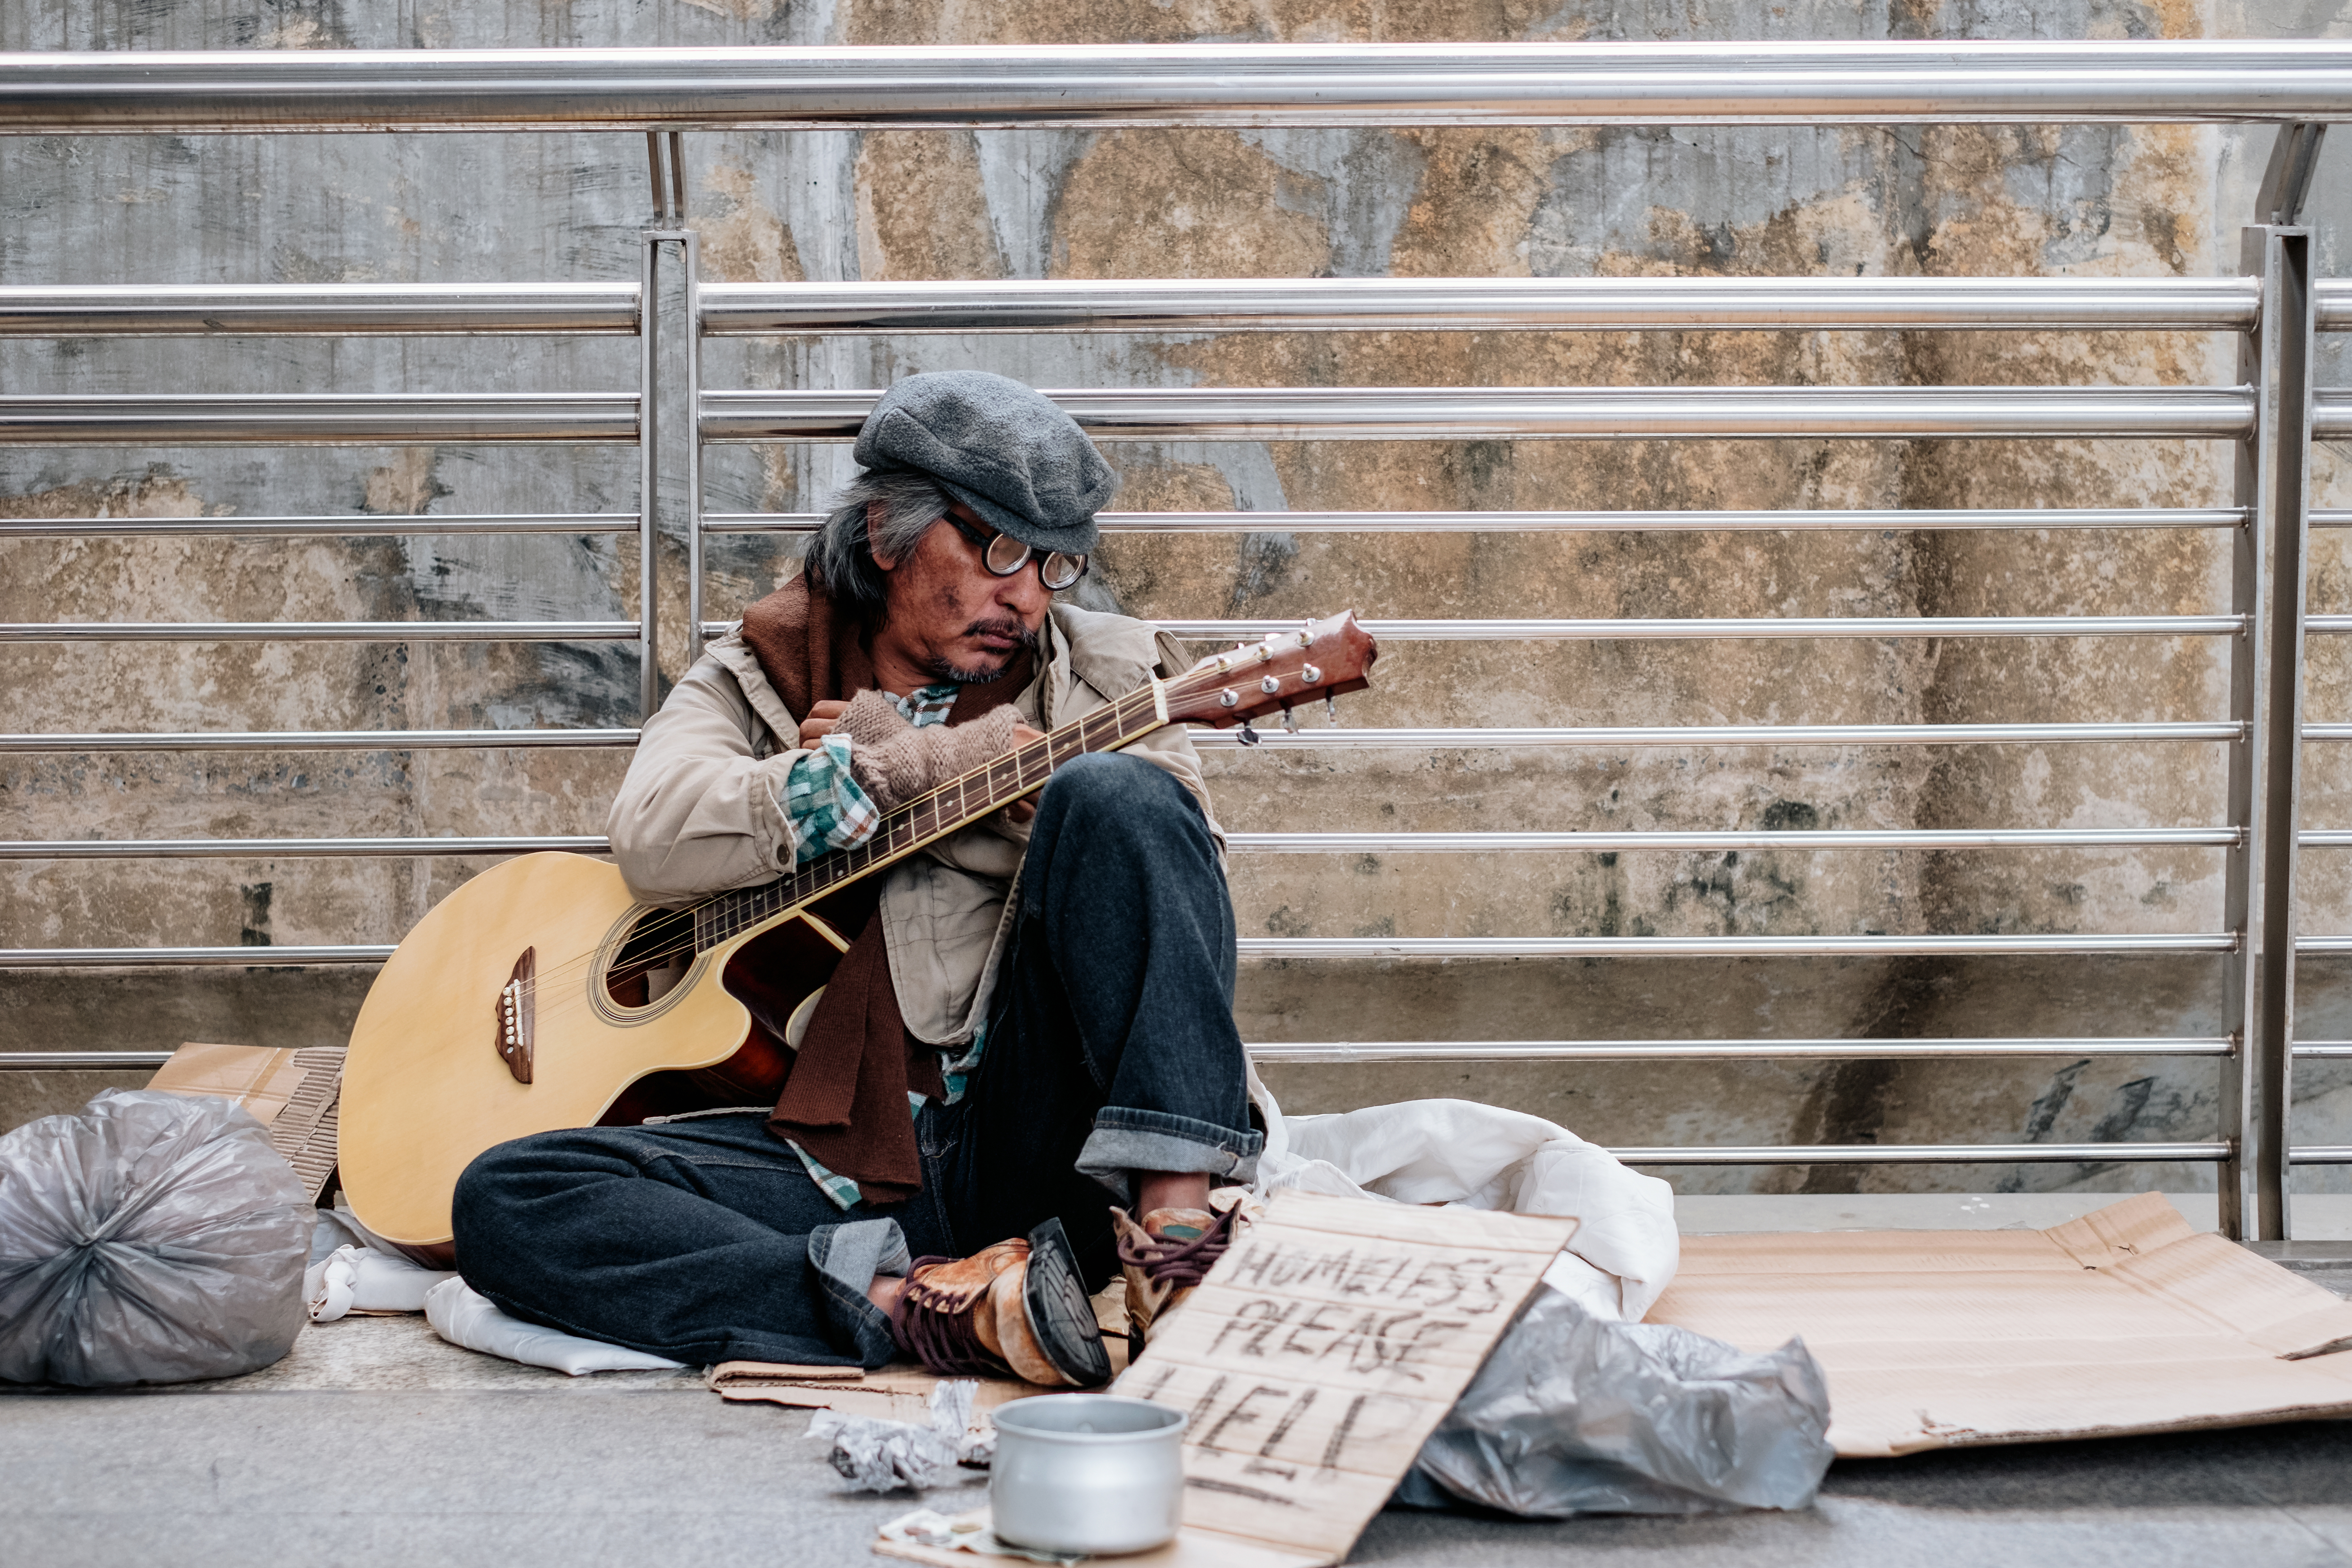 Homeless person sit holding guitar. | Source: Shutterstock